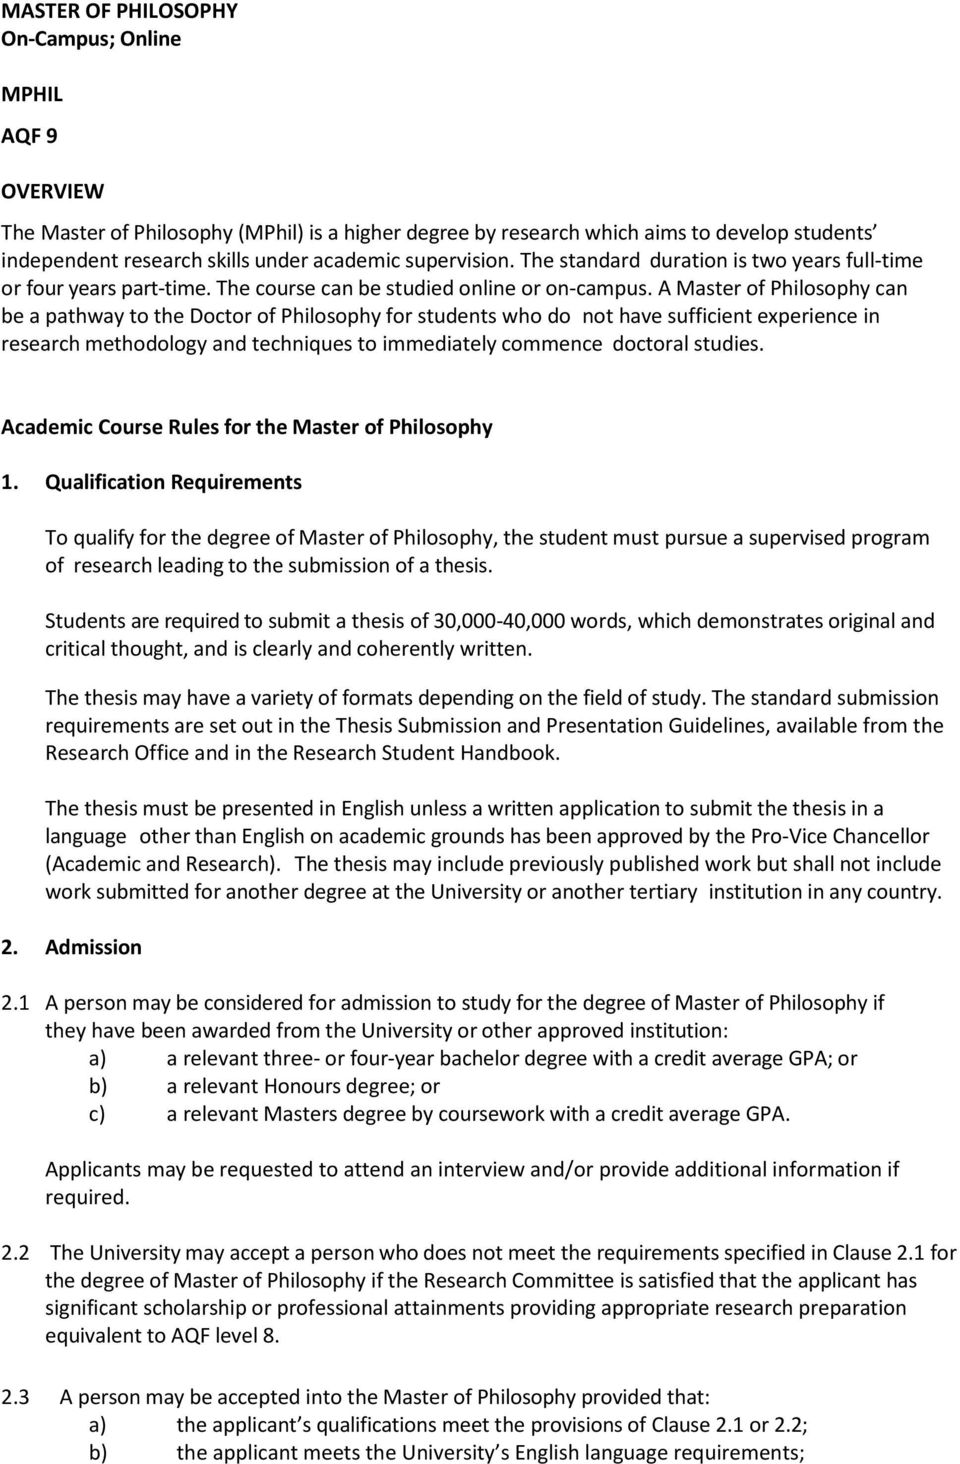 A Master of Philosophy can be a pathway to the Doctor of Philosophy for students who do not have sufficient experience in research methodology and techniques to immediately commence doctoral studies.